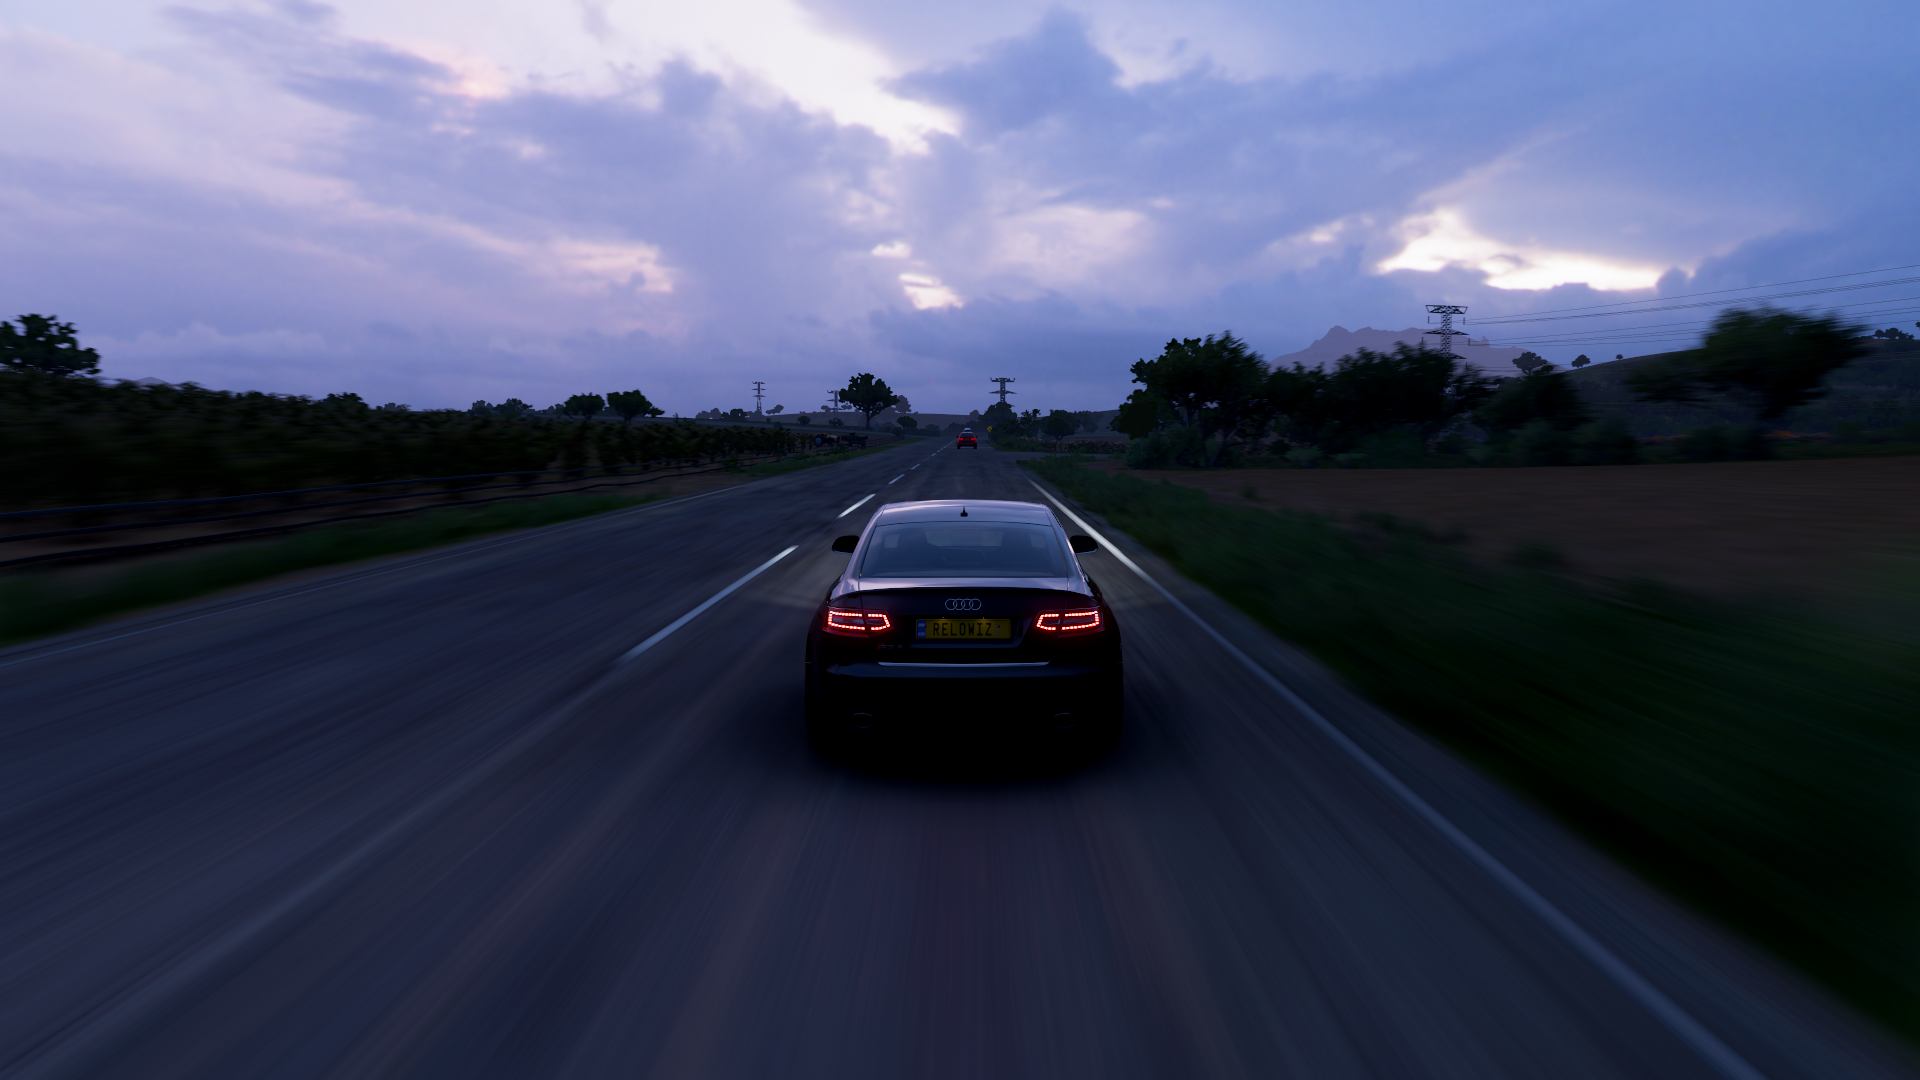 Forza Forza Horizon 5 Audi Audi RS6 Car Video Games Road CGi Taillights Clouds Rear View Sky 1920x1080